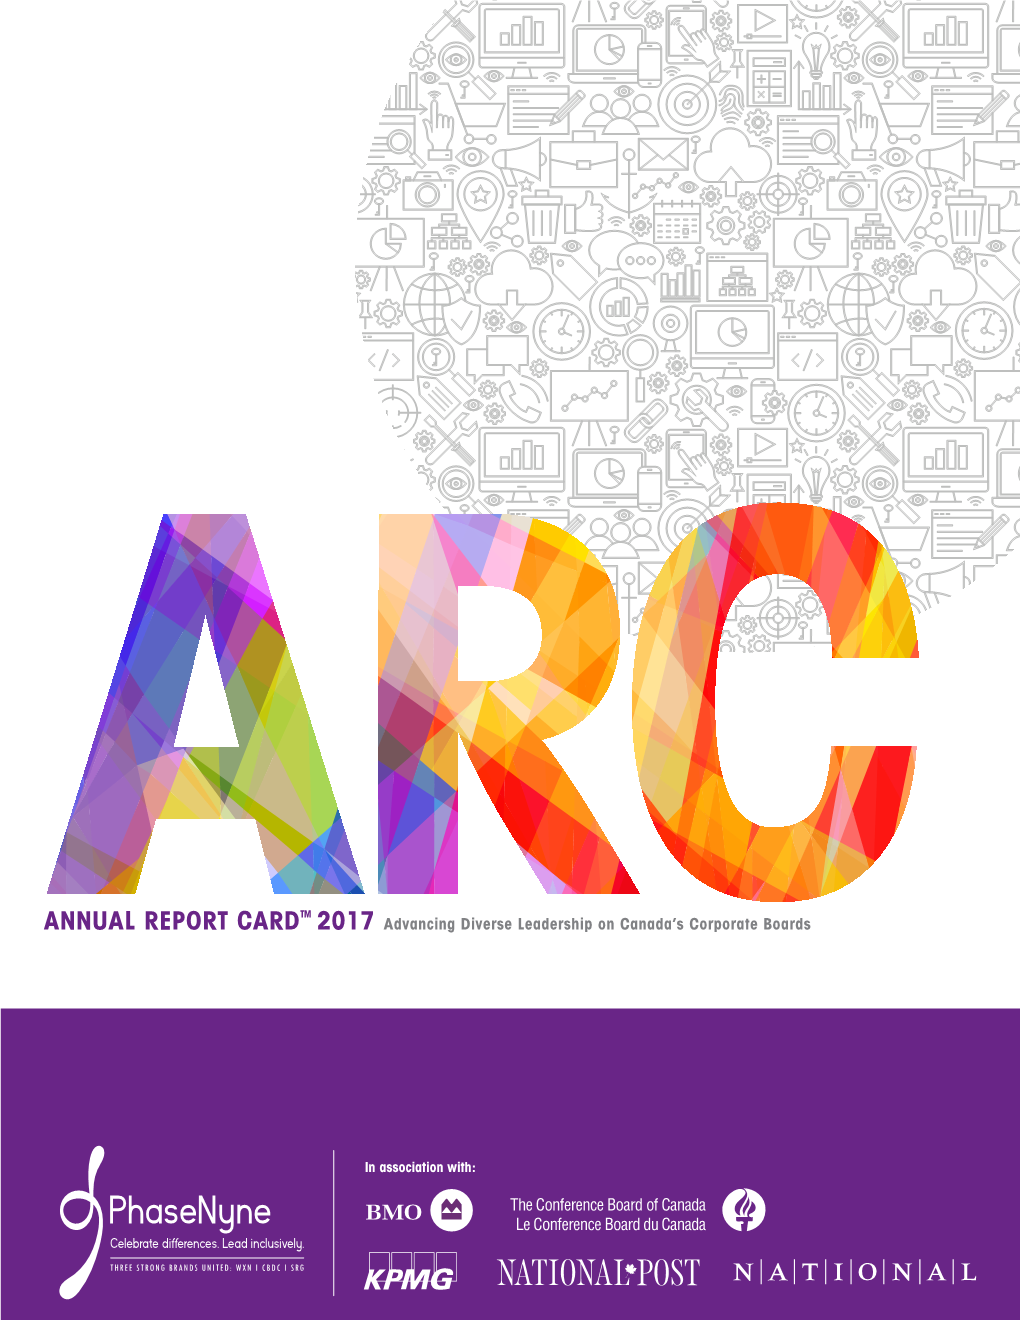 ANNUAL REPORT CARD 2017 Advancing Diverse Leadership on Canada’S Corporate Boards